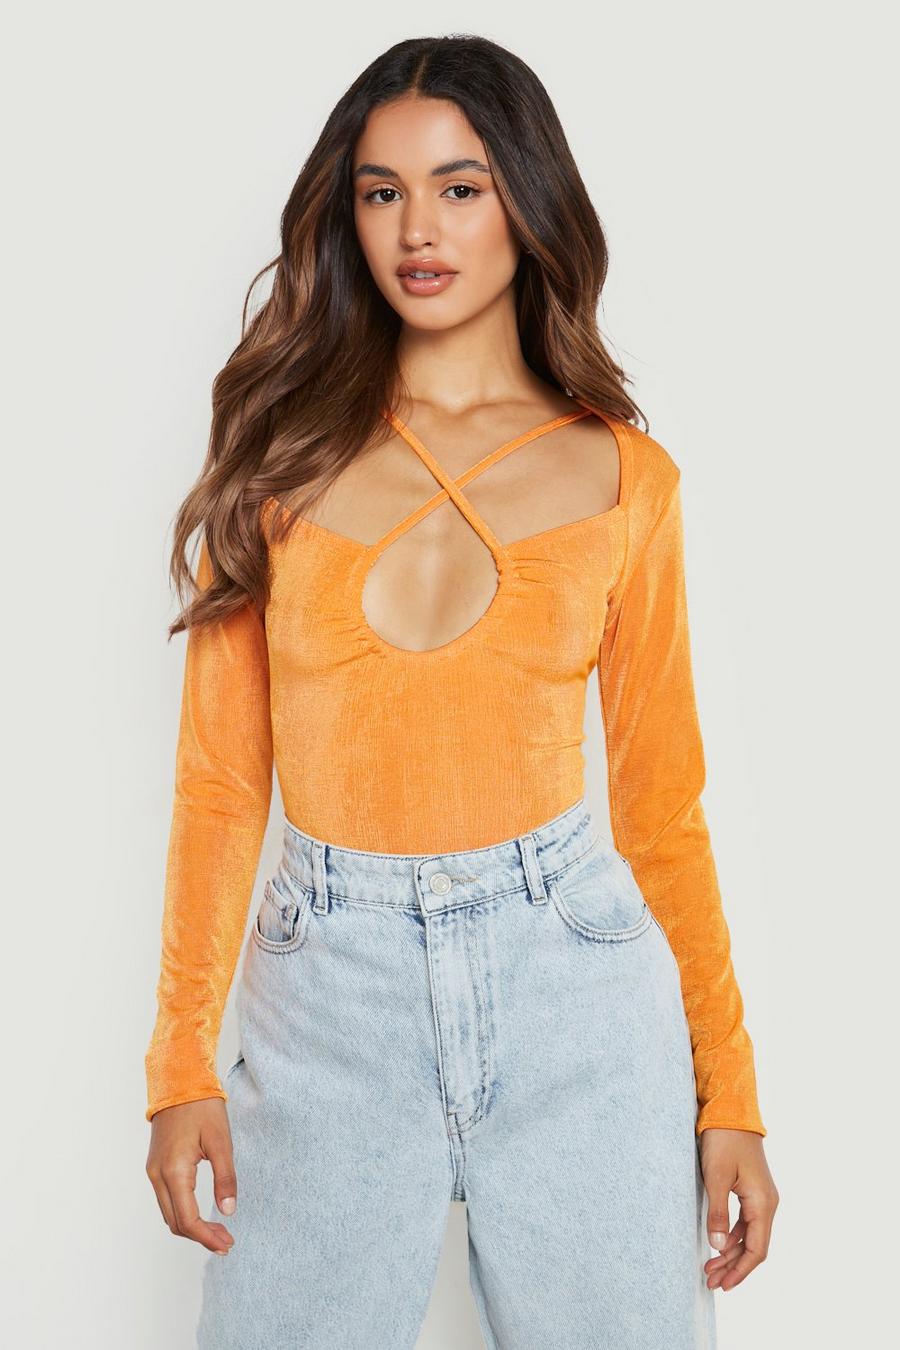 Tangerine Acetate Slinky Cut Out Bodysuit image number 1